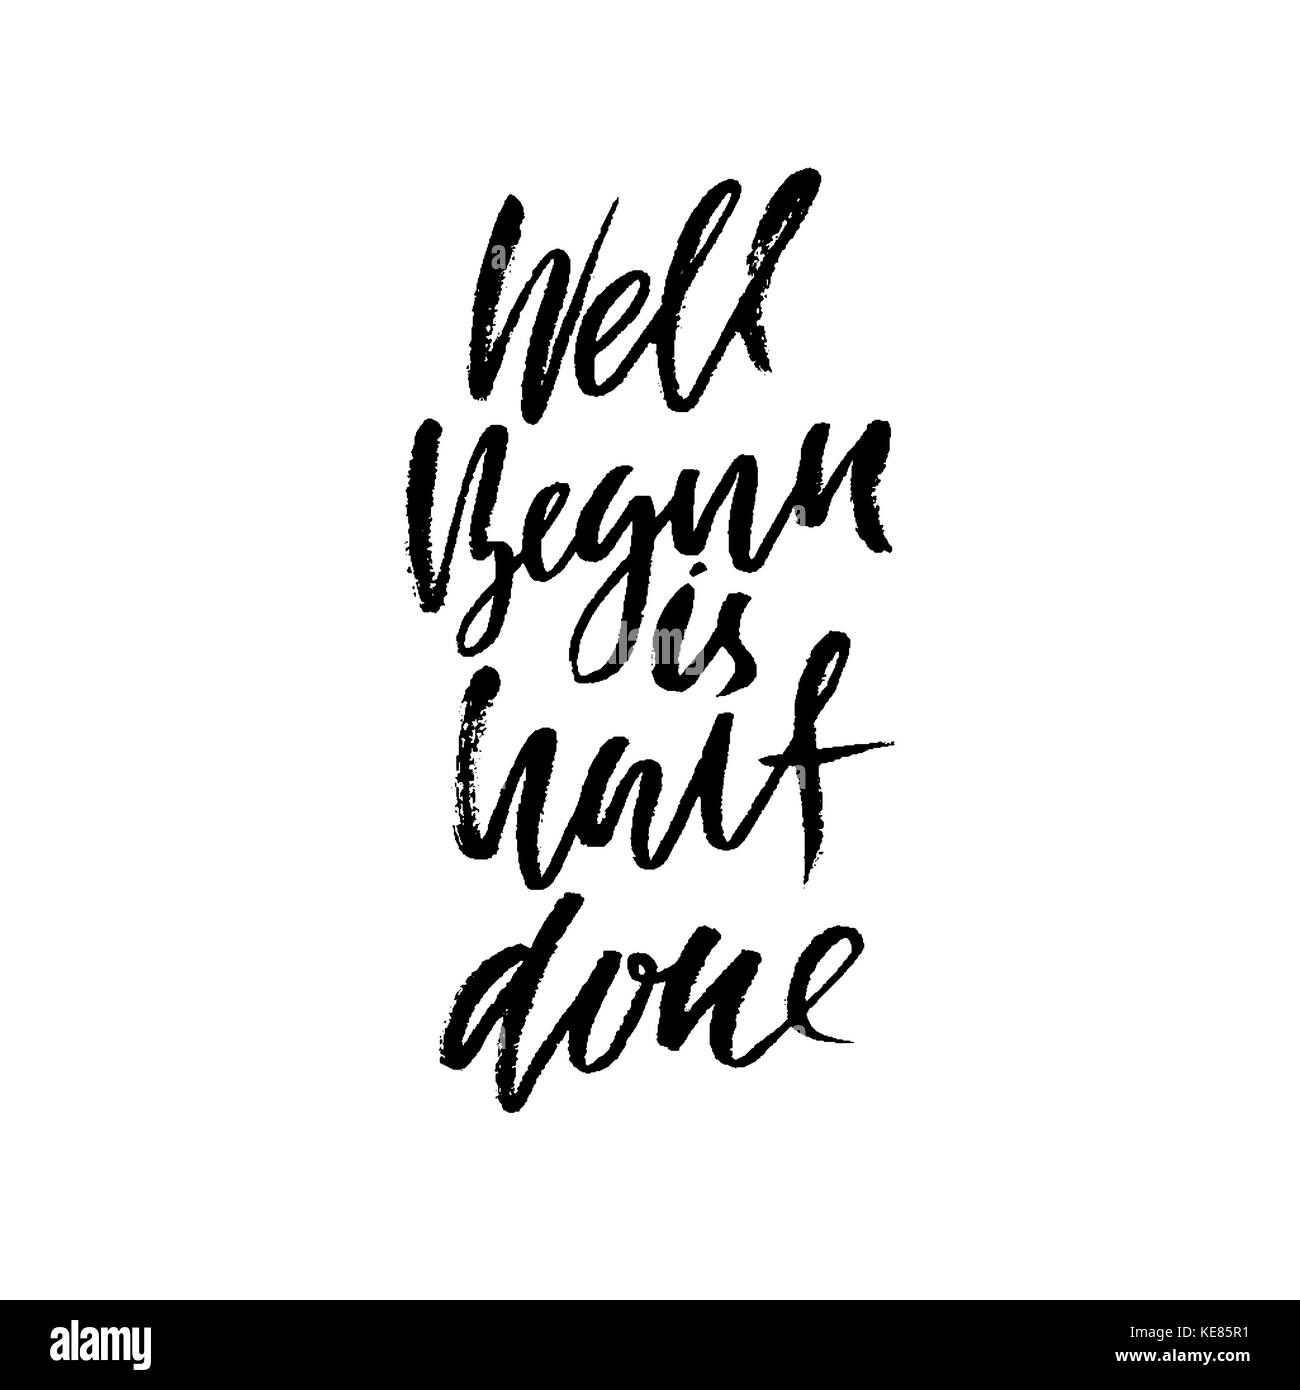 Well begun is half done. Inspirational and motivational quote. Hand painted brush lettering. Handwritten modern typography. Vector illustration. Stock Vector